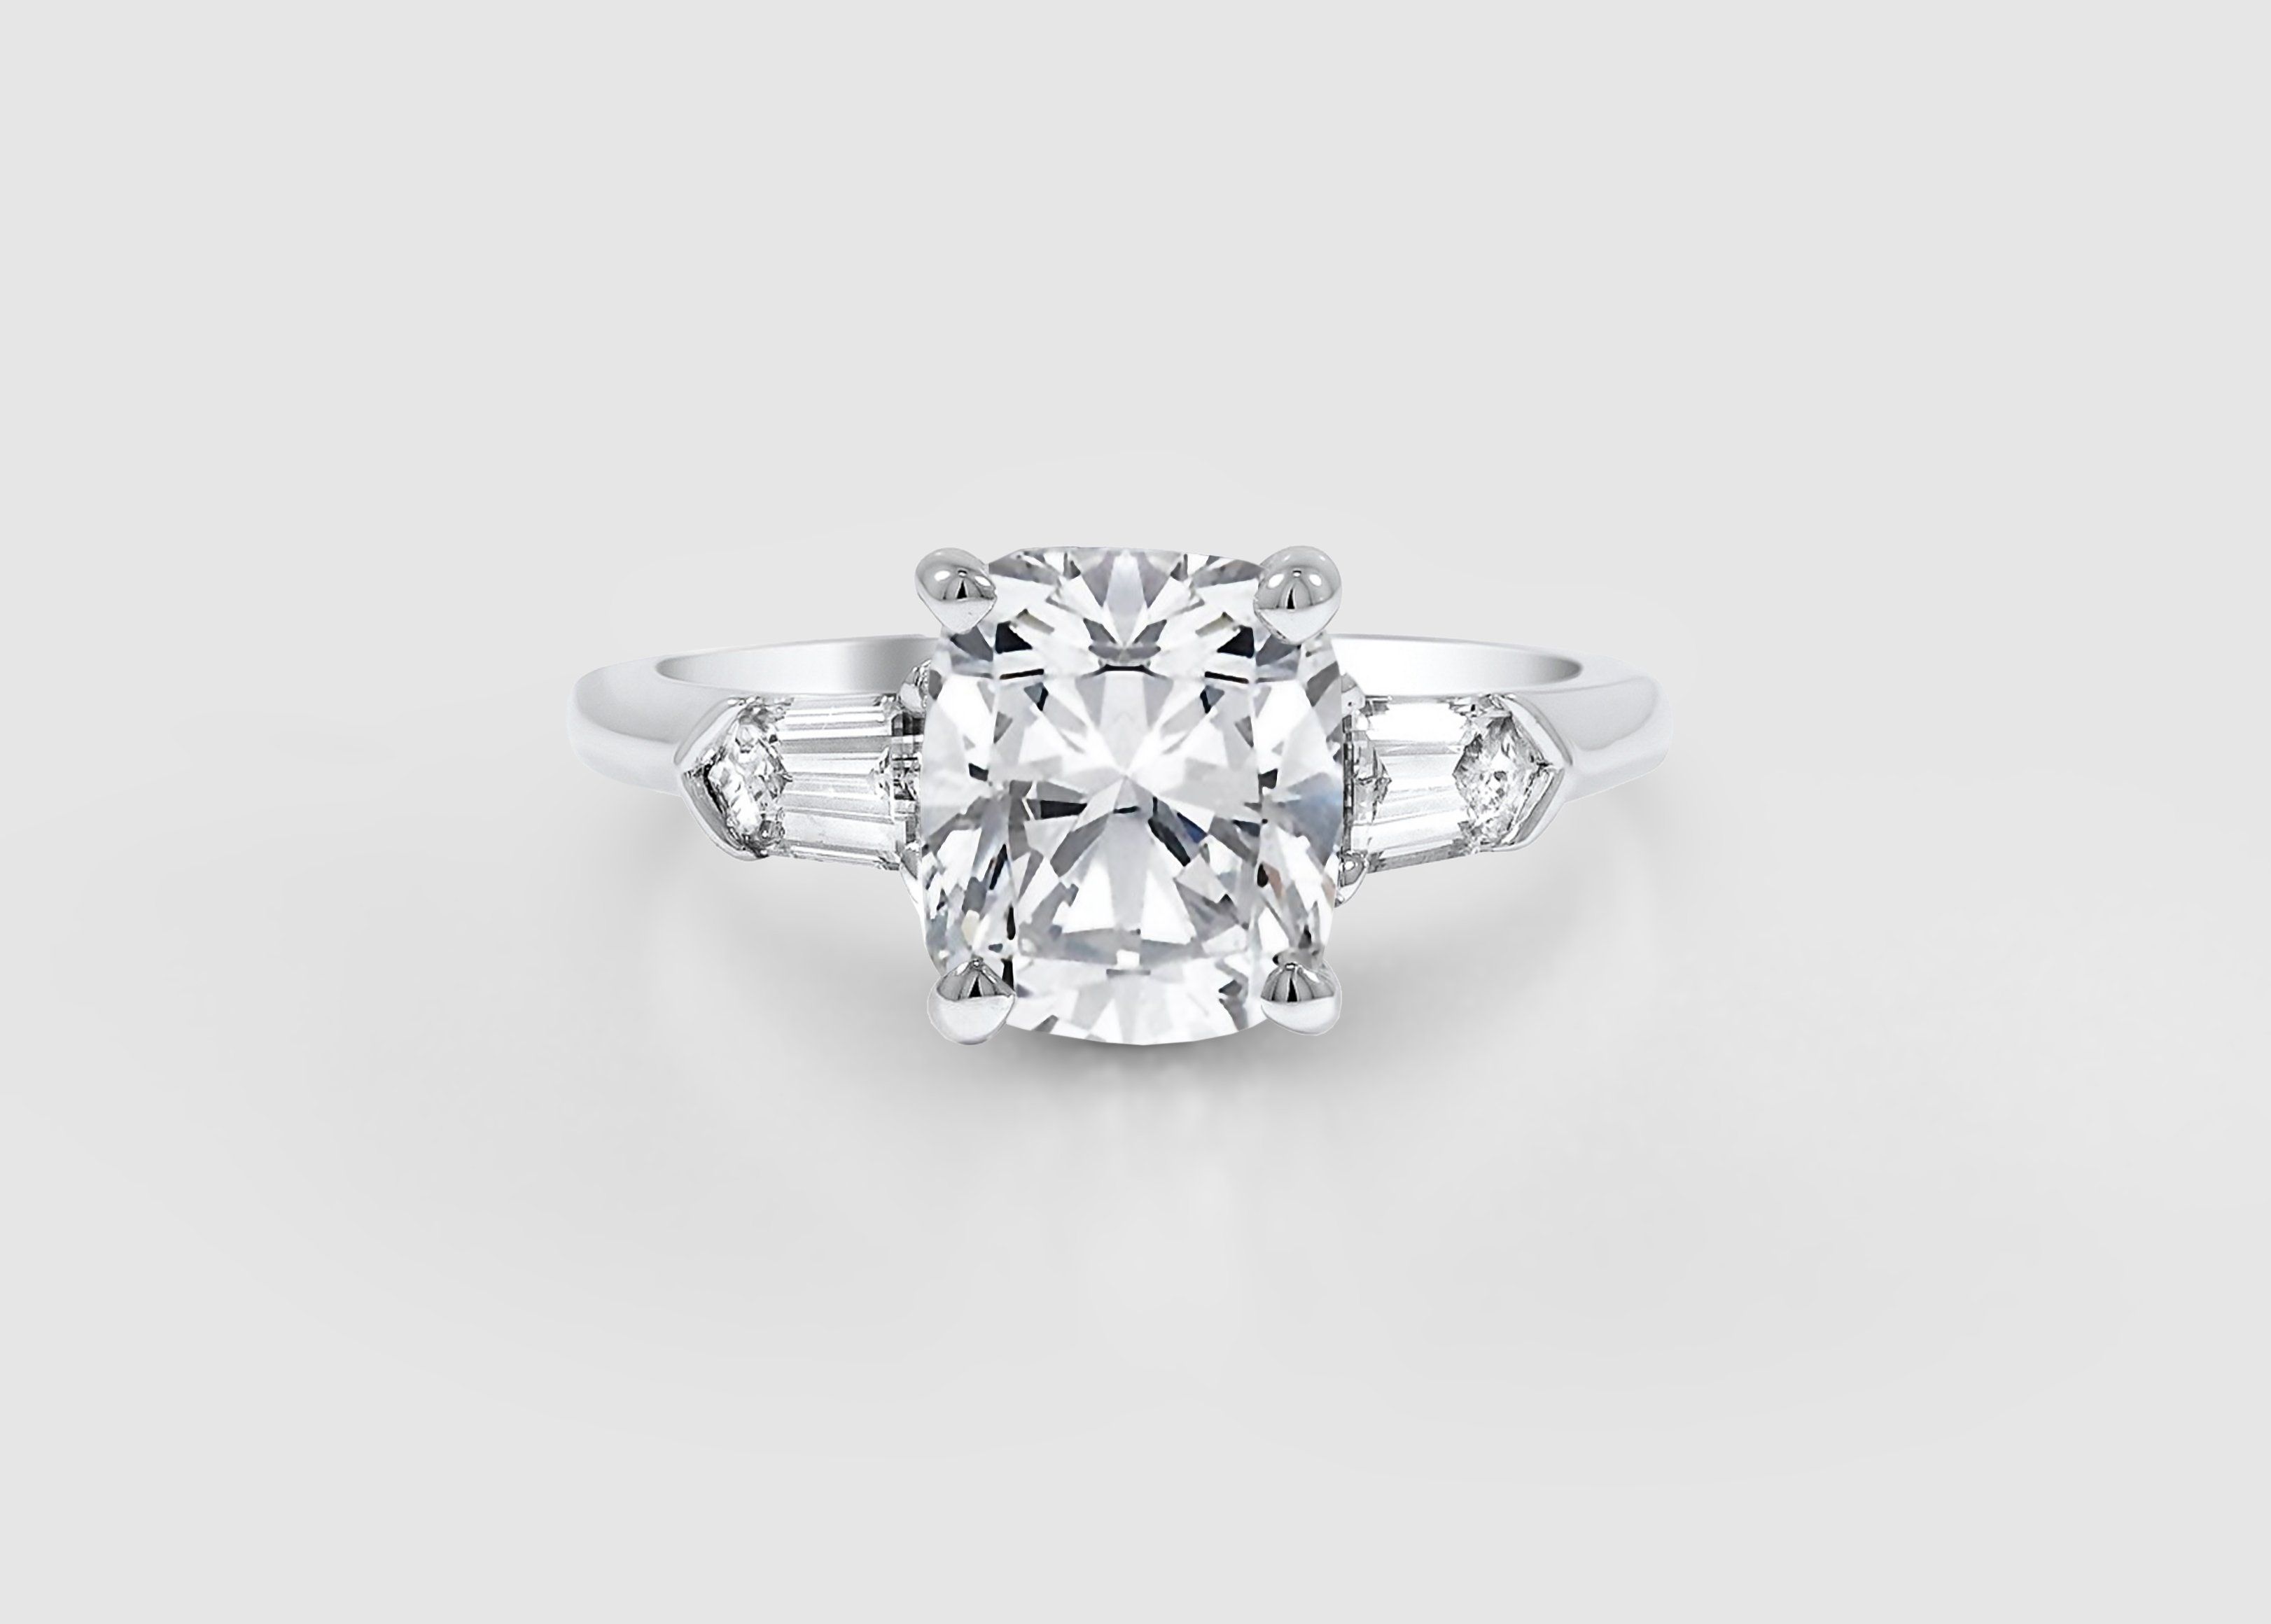 Diamond Engagement Ring Regarding 2019 Diamond Bold Five Stone Anniversary Bands In White Gold (View 23 of 25)